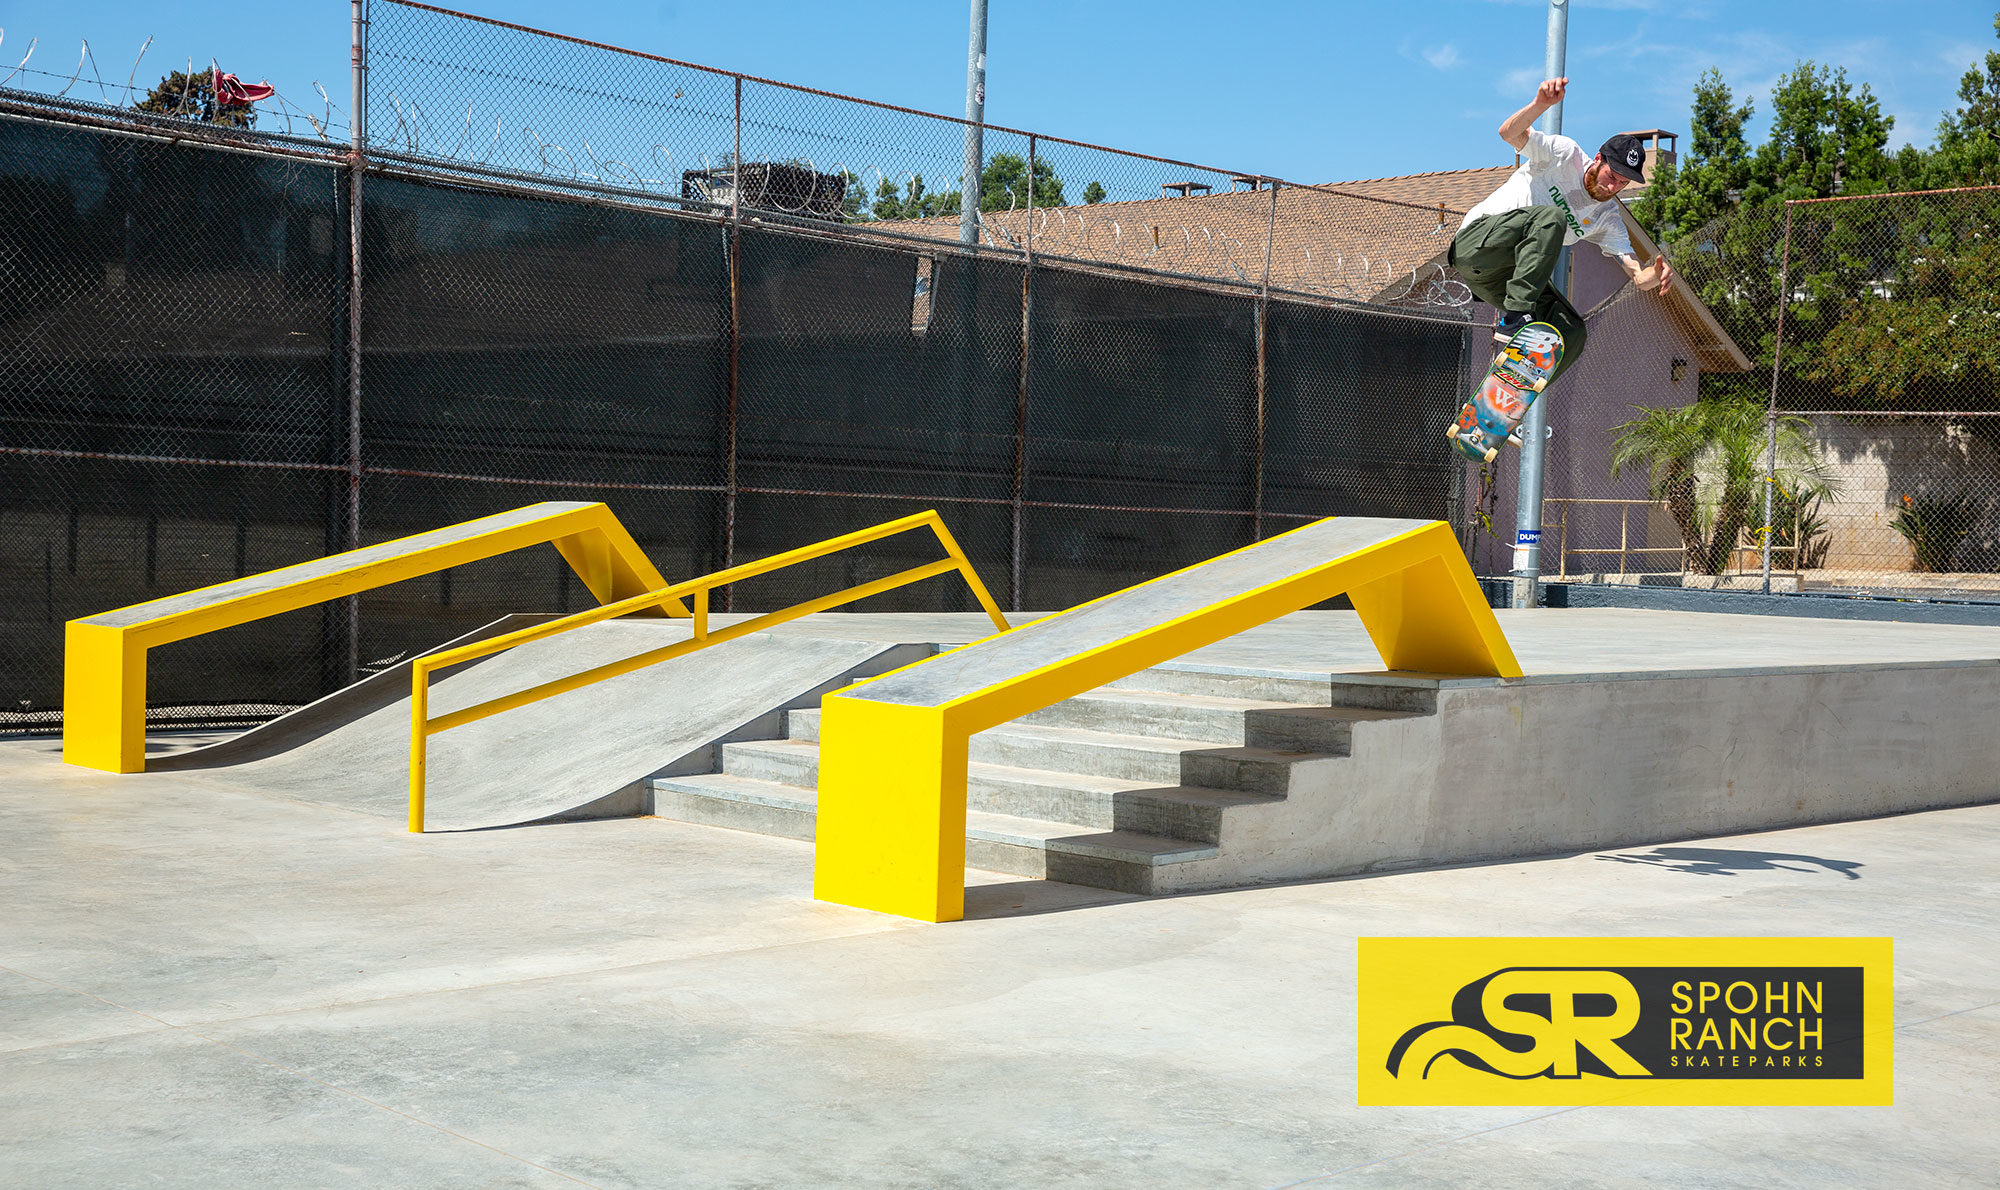 Wallie at Spohn Ranch designed La Pintoresca Skatepark by Worble own Cookie Colburn